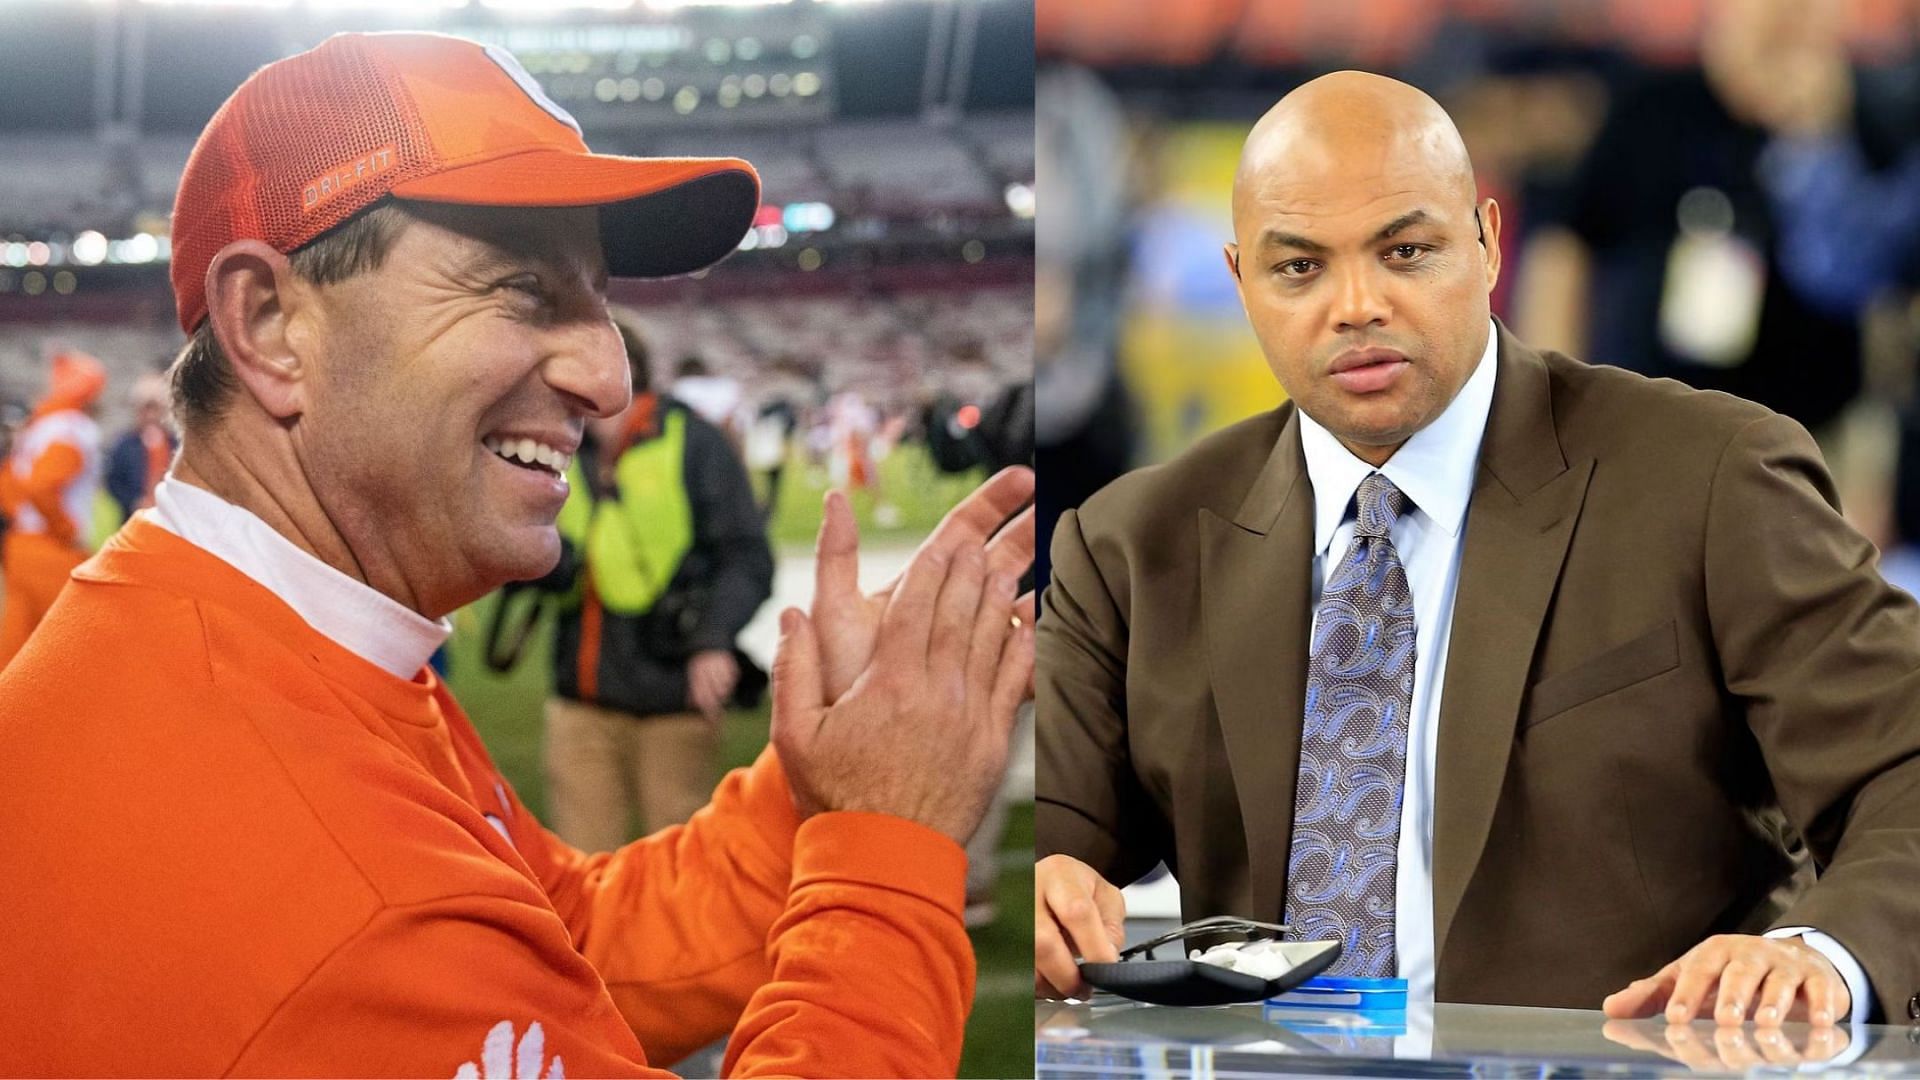 Clemson football Dabo Swinney was wrongfully congratulated by CBS analyst Charles Barkley after the Tigers won their Sweet 16 match against Arizona on Friday.